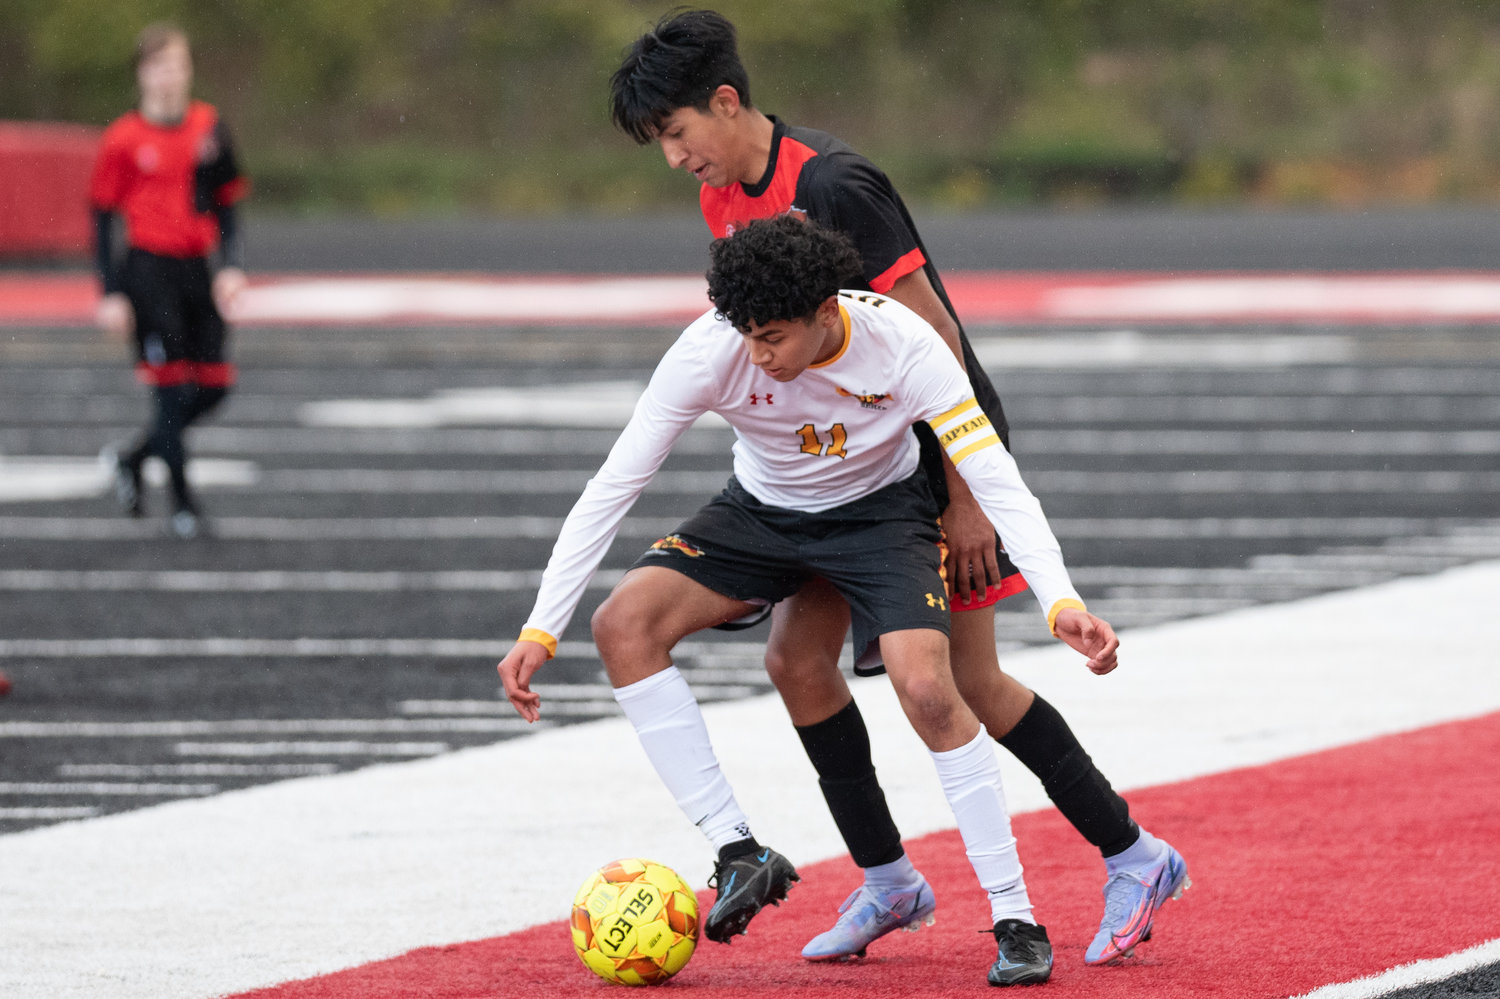 A United player looks to keep possession against Tenino March 15 at Tenino Beaver Stadium.